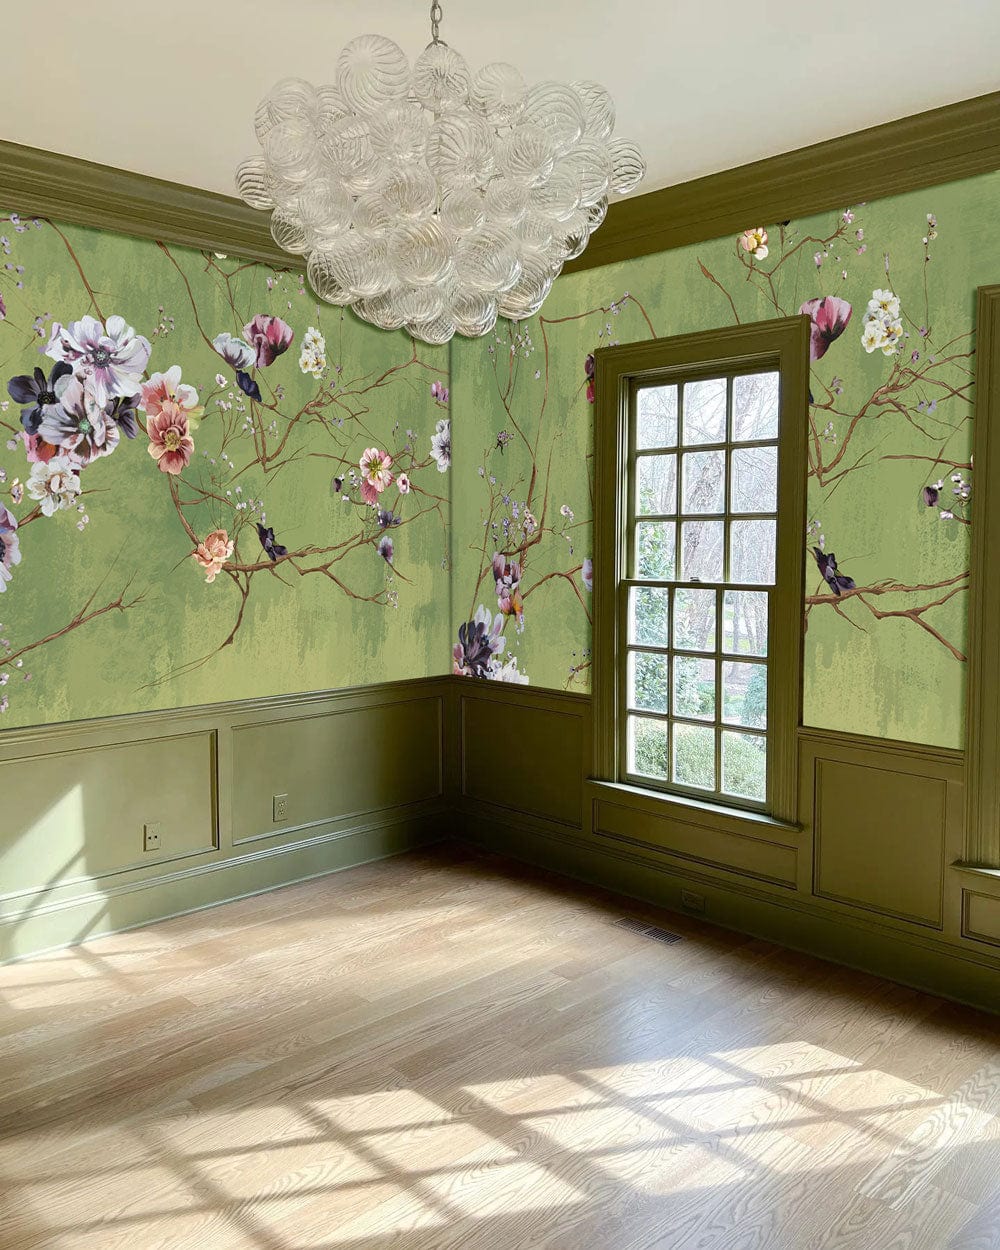 floral twigs against a grassy ground oil painting wallpaper mural for use in home decoration